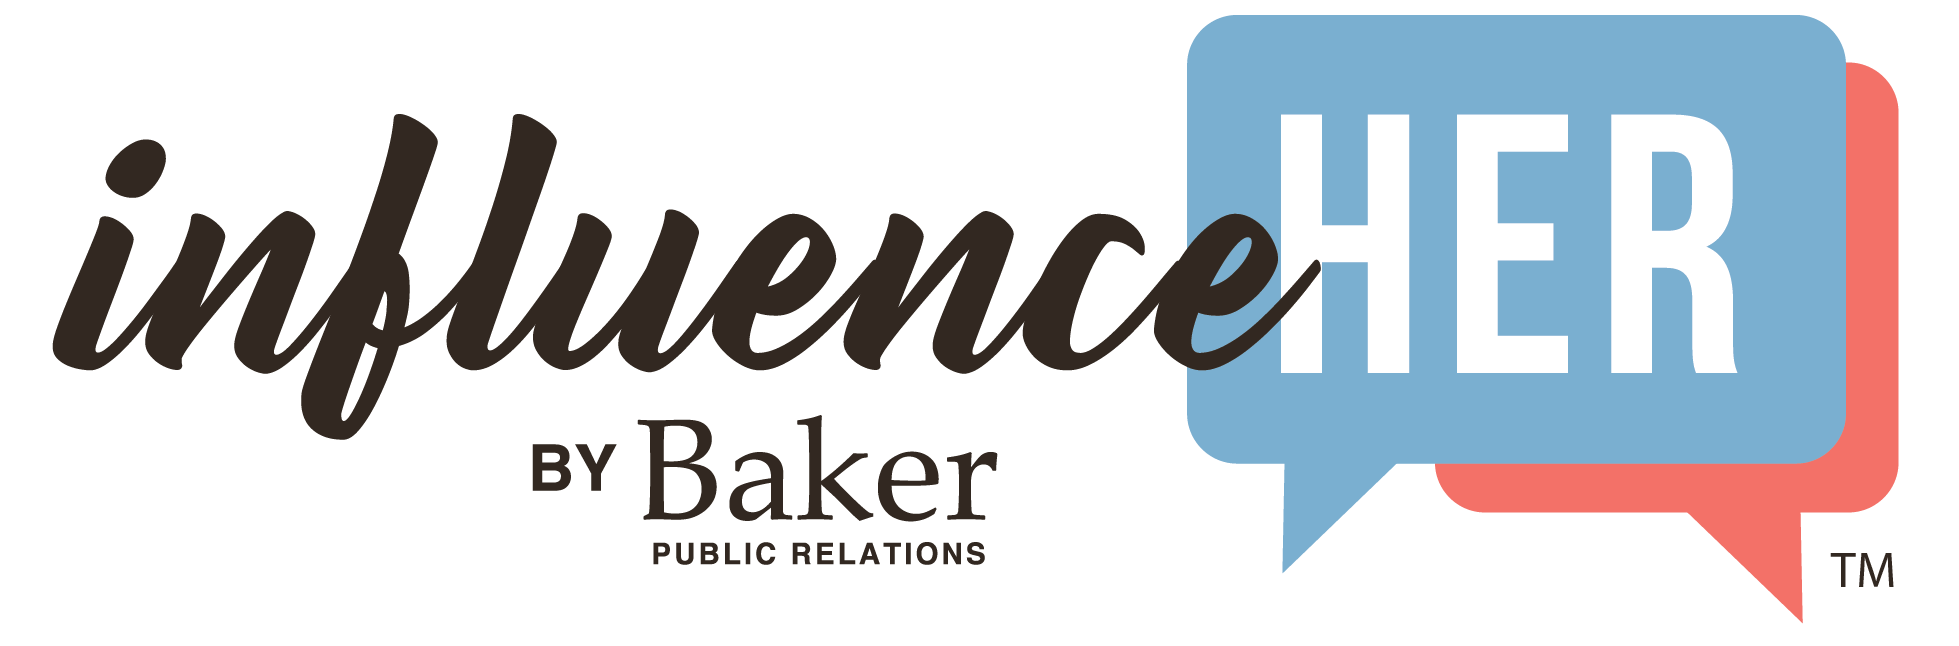 Baker Public Relations Named PR Daily’s Content Marketing 2021 Awards Finalist